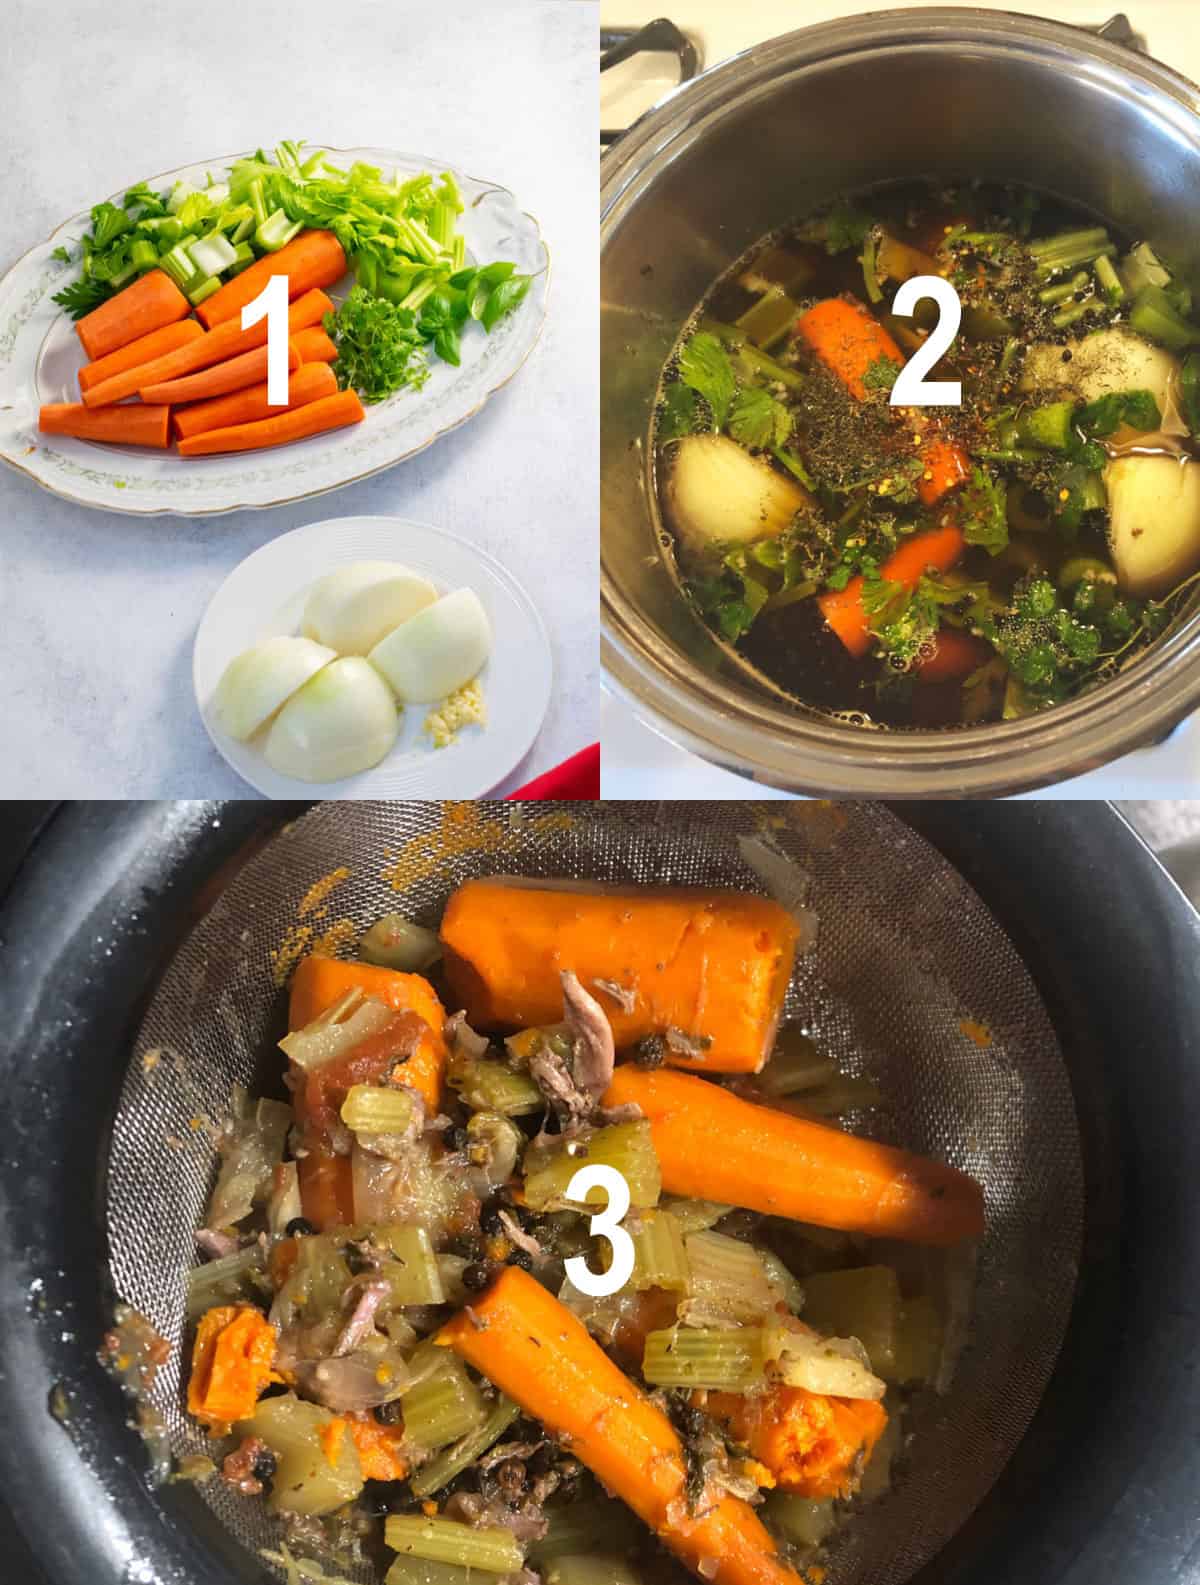 raw vegetables, vegetables cooking in pot, strained veggies